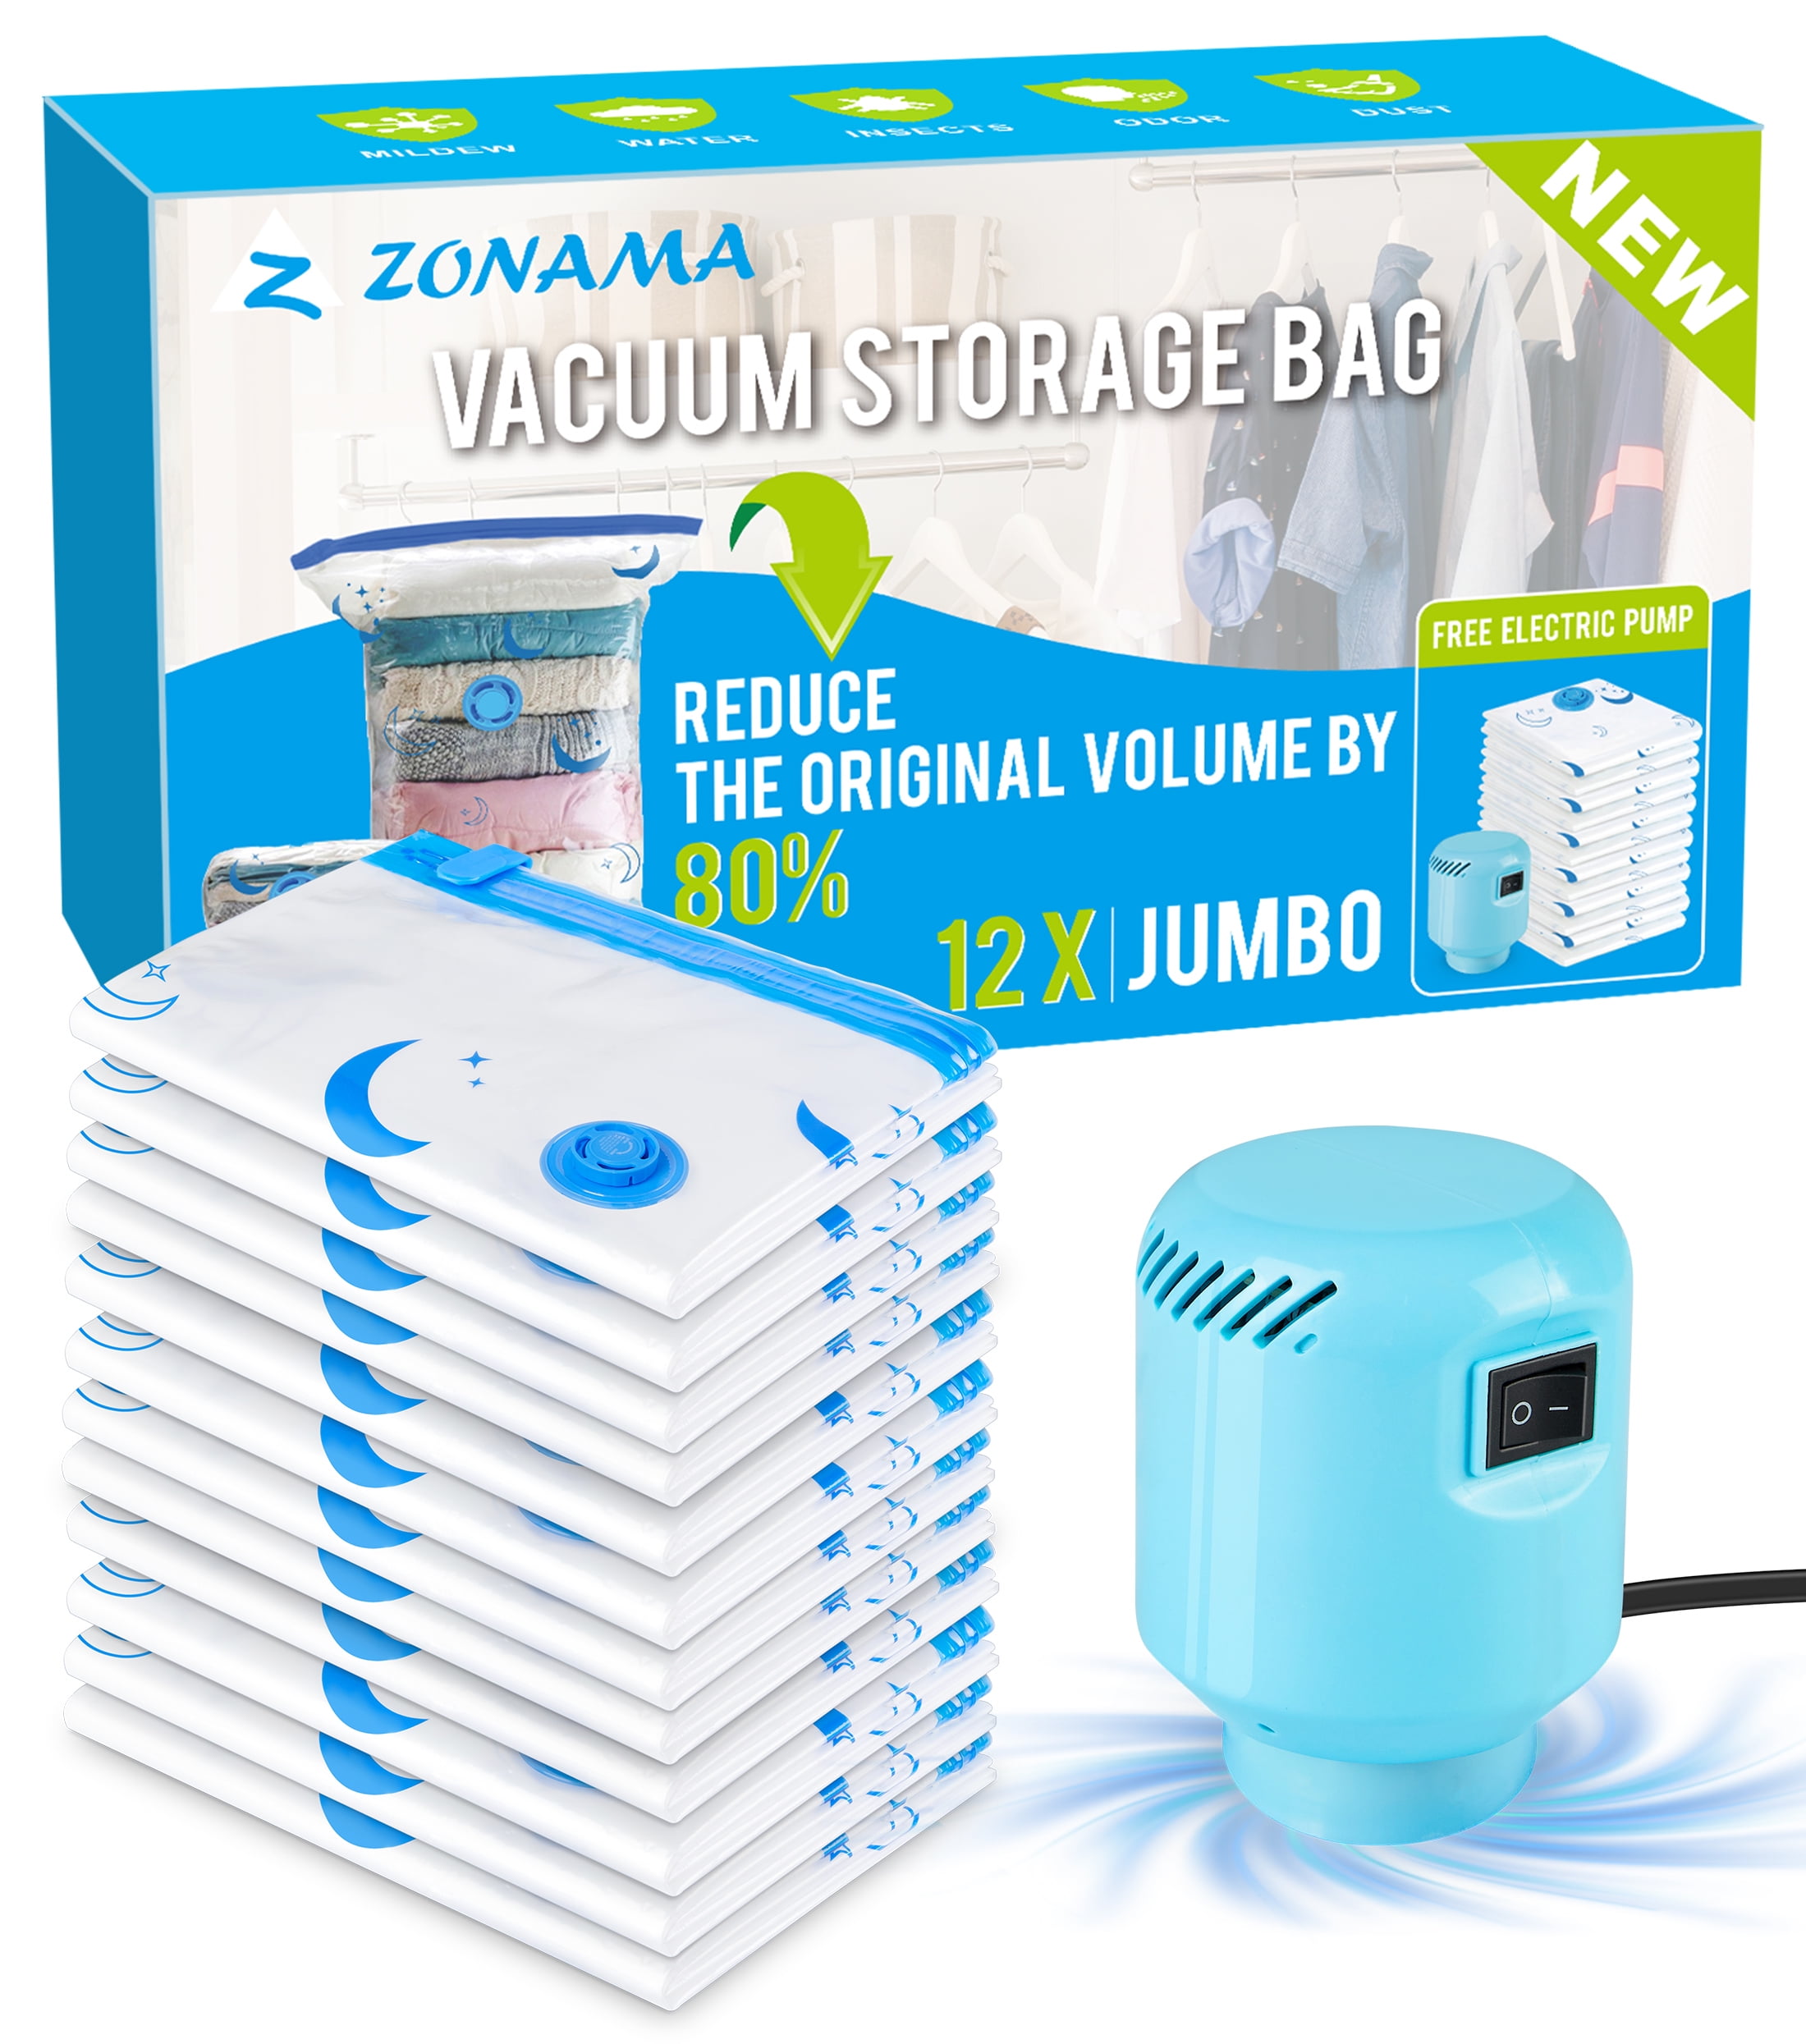 Z ZONAMA Vacuum Storage Bags, 5 Pack Jumbo Size (40x28) Reusable Vacuum  Compression Space Saving Bag for Clothes, Mattress, Blankets, Duvets